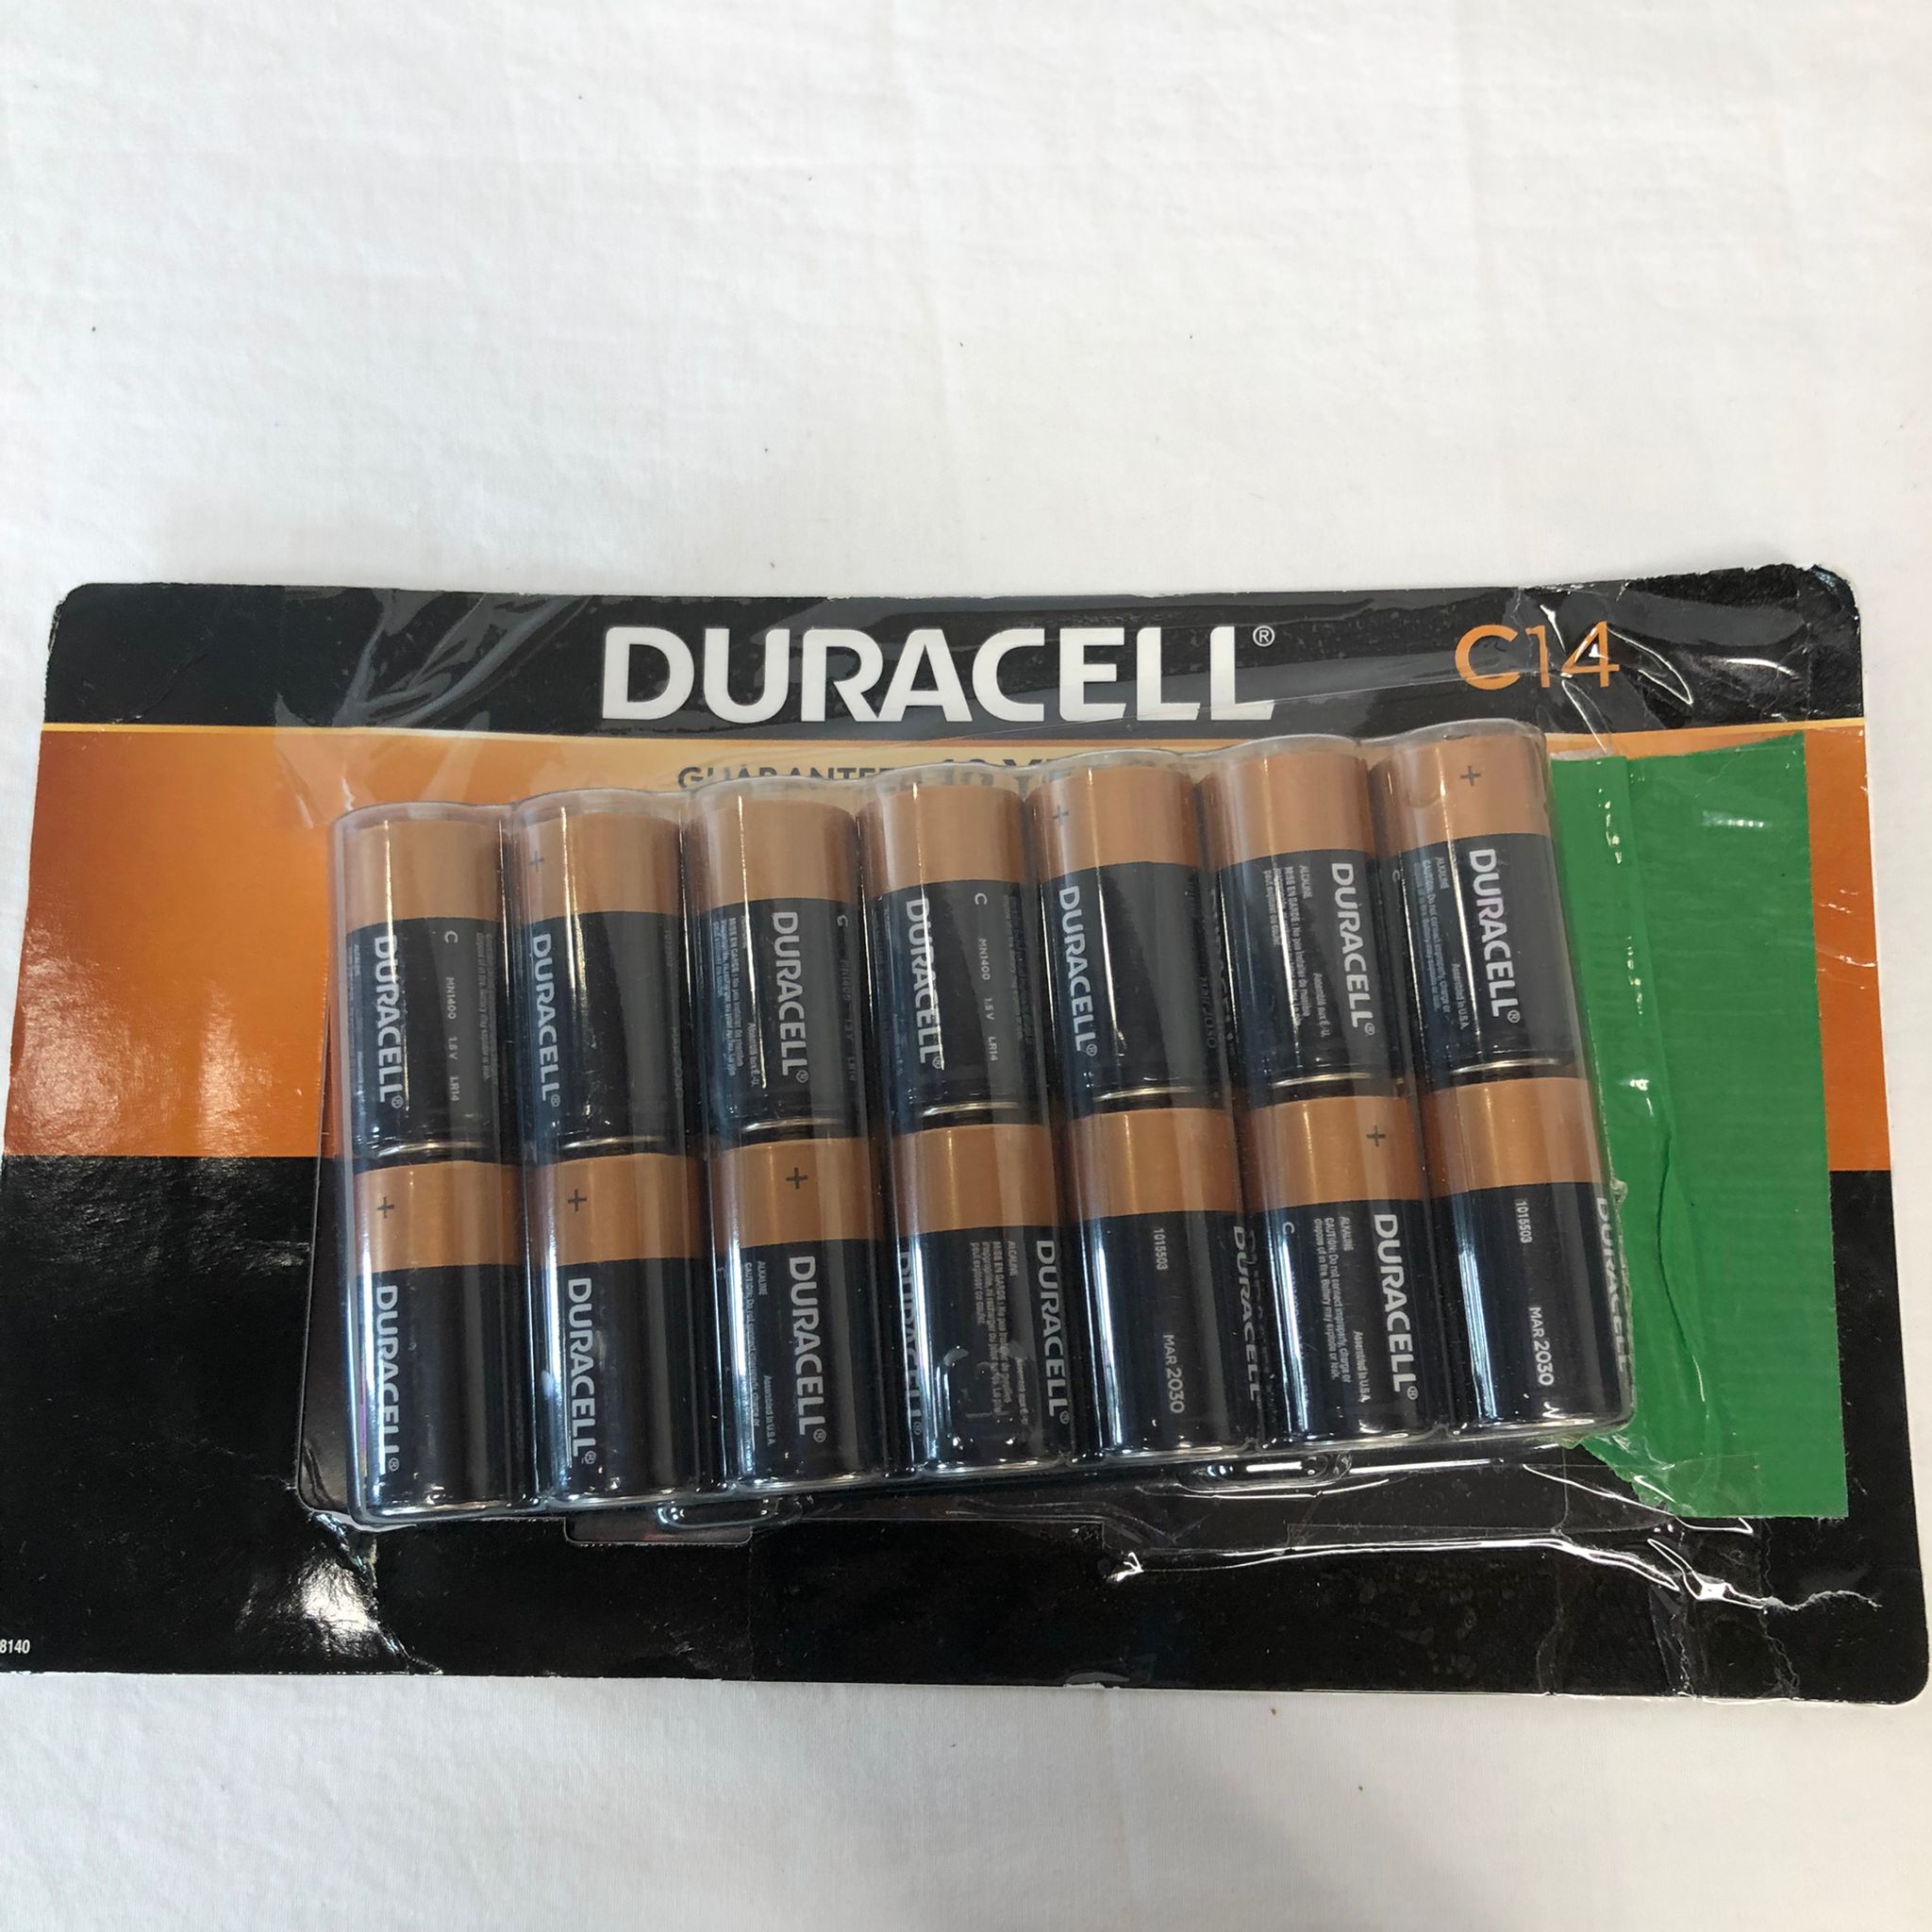 As is Duracell C Alkaline Batteries, 14-count